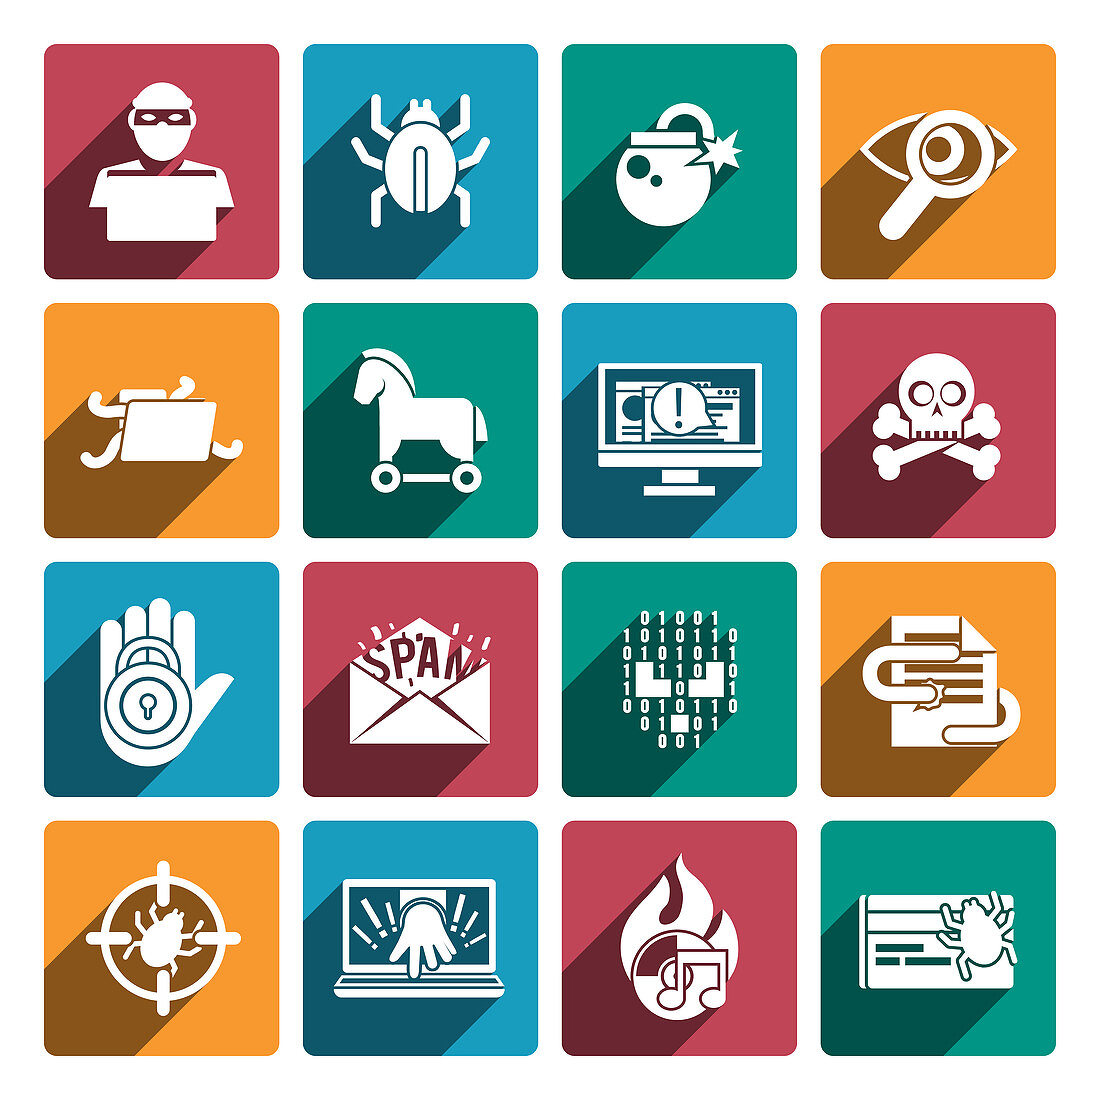 Hacker and computer security icons, illustration